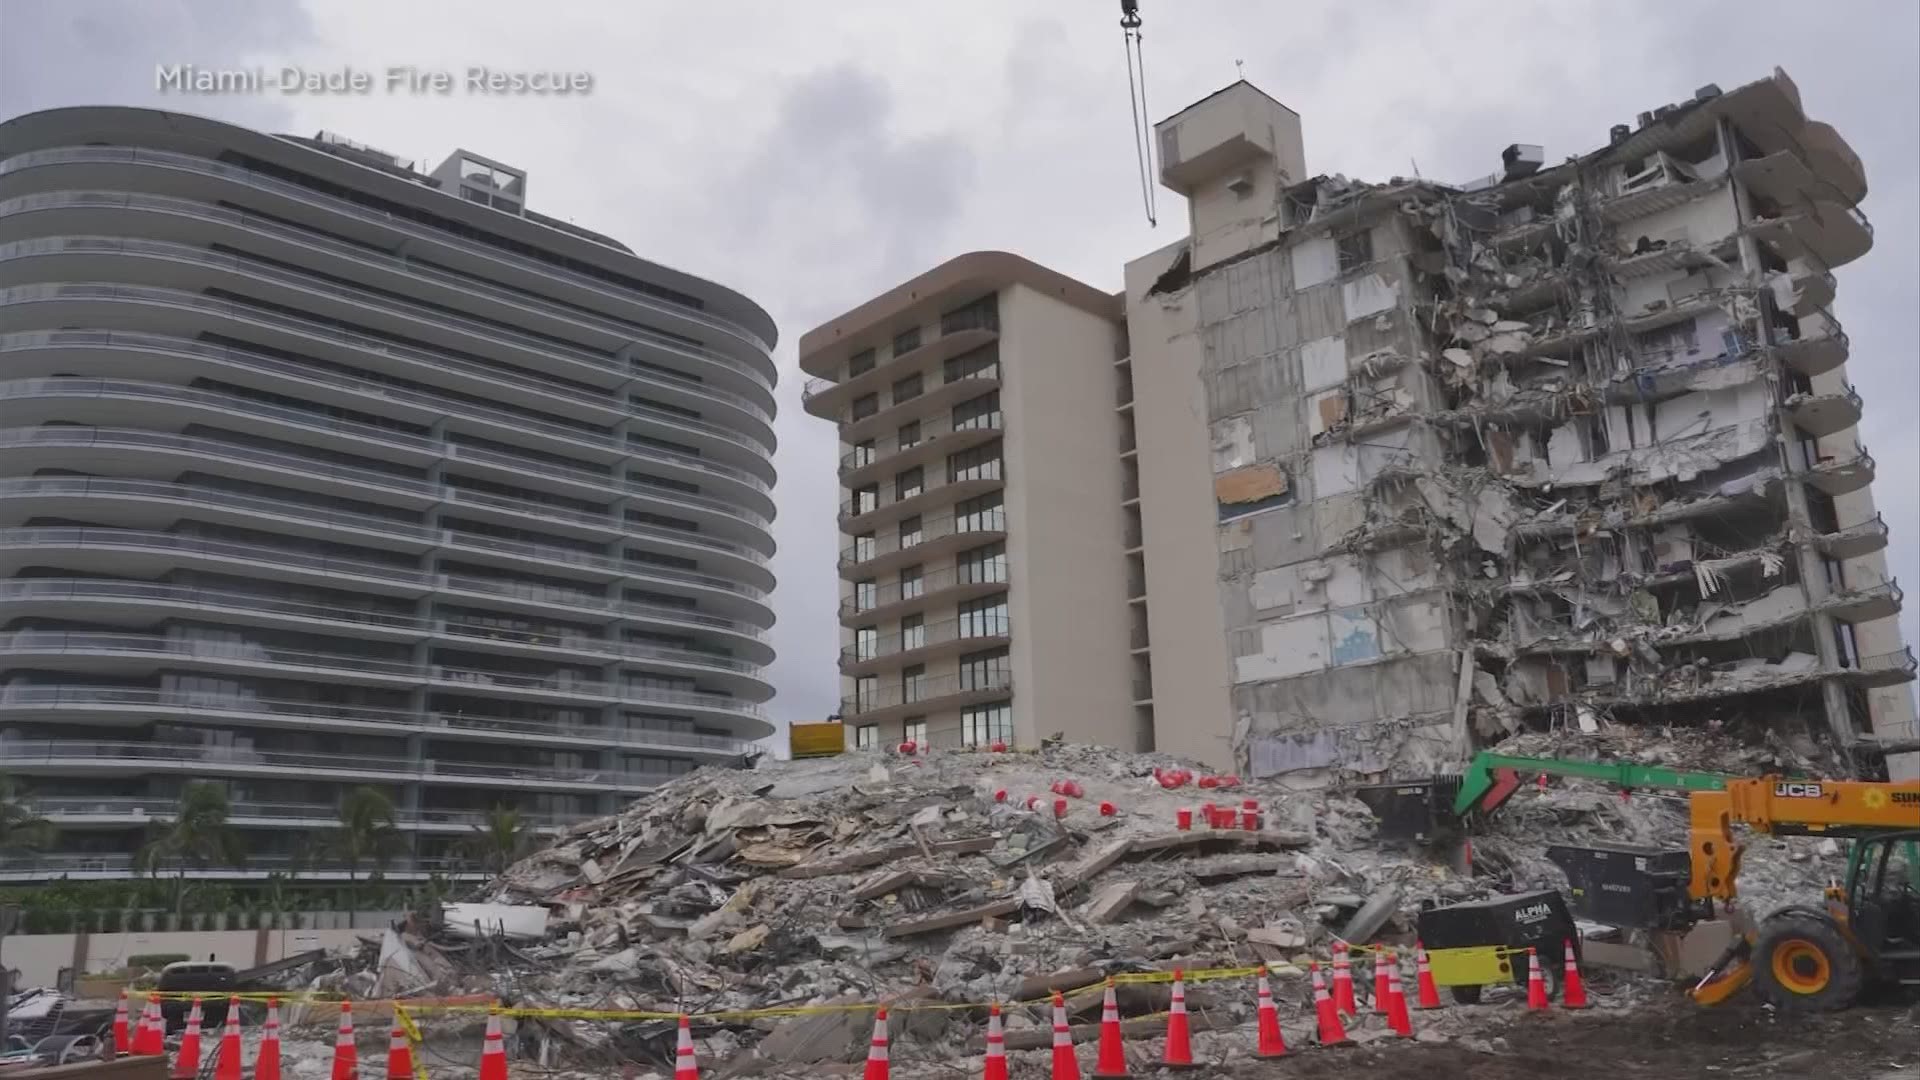 Rescuers searched through fresh rubble Monday after the last of the collapsed Florida condo building was demolished.